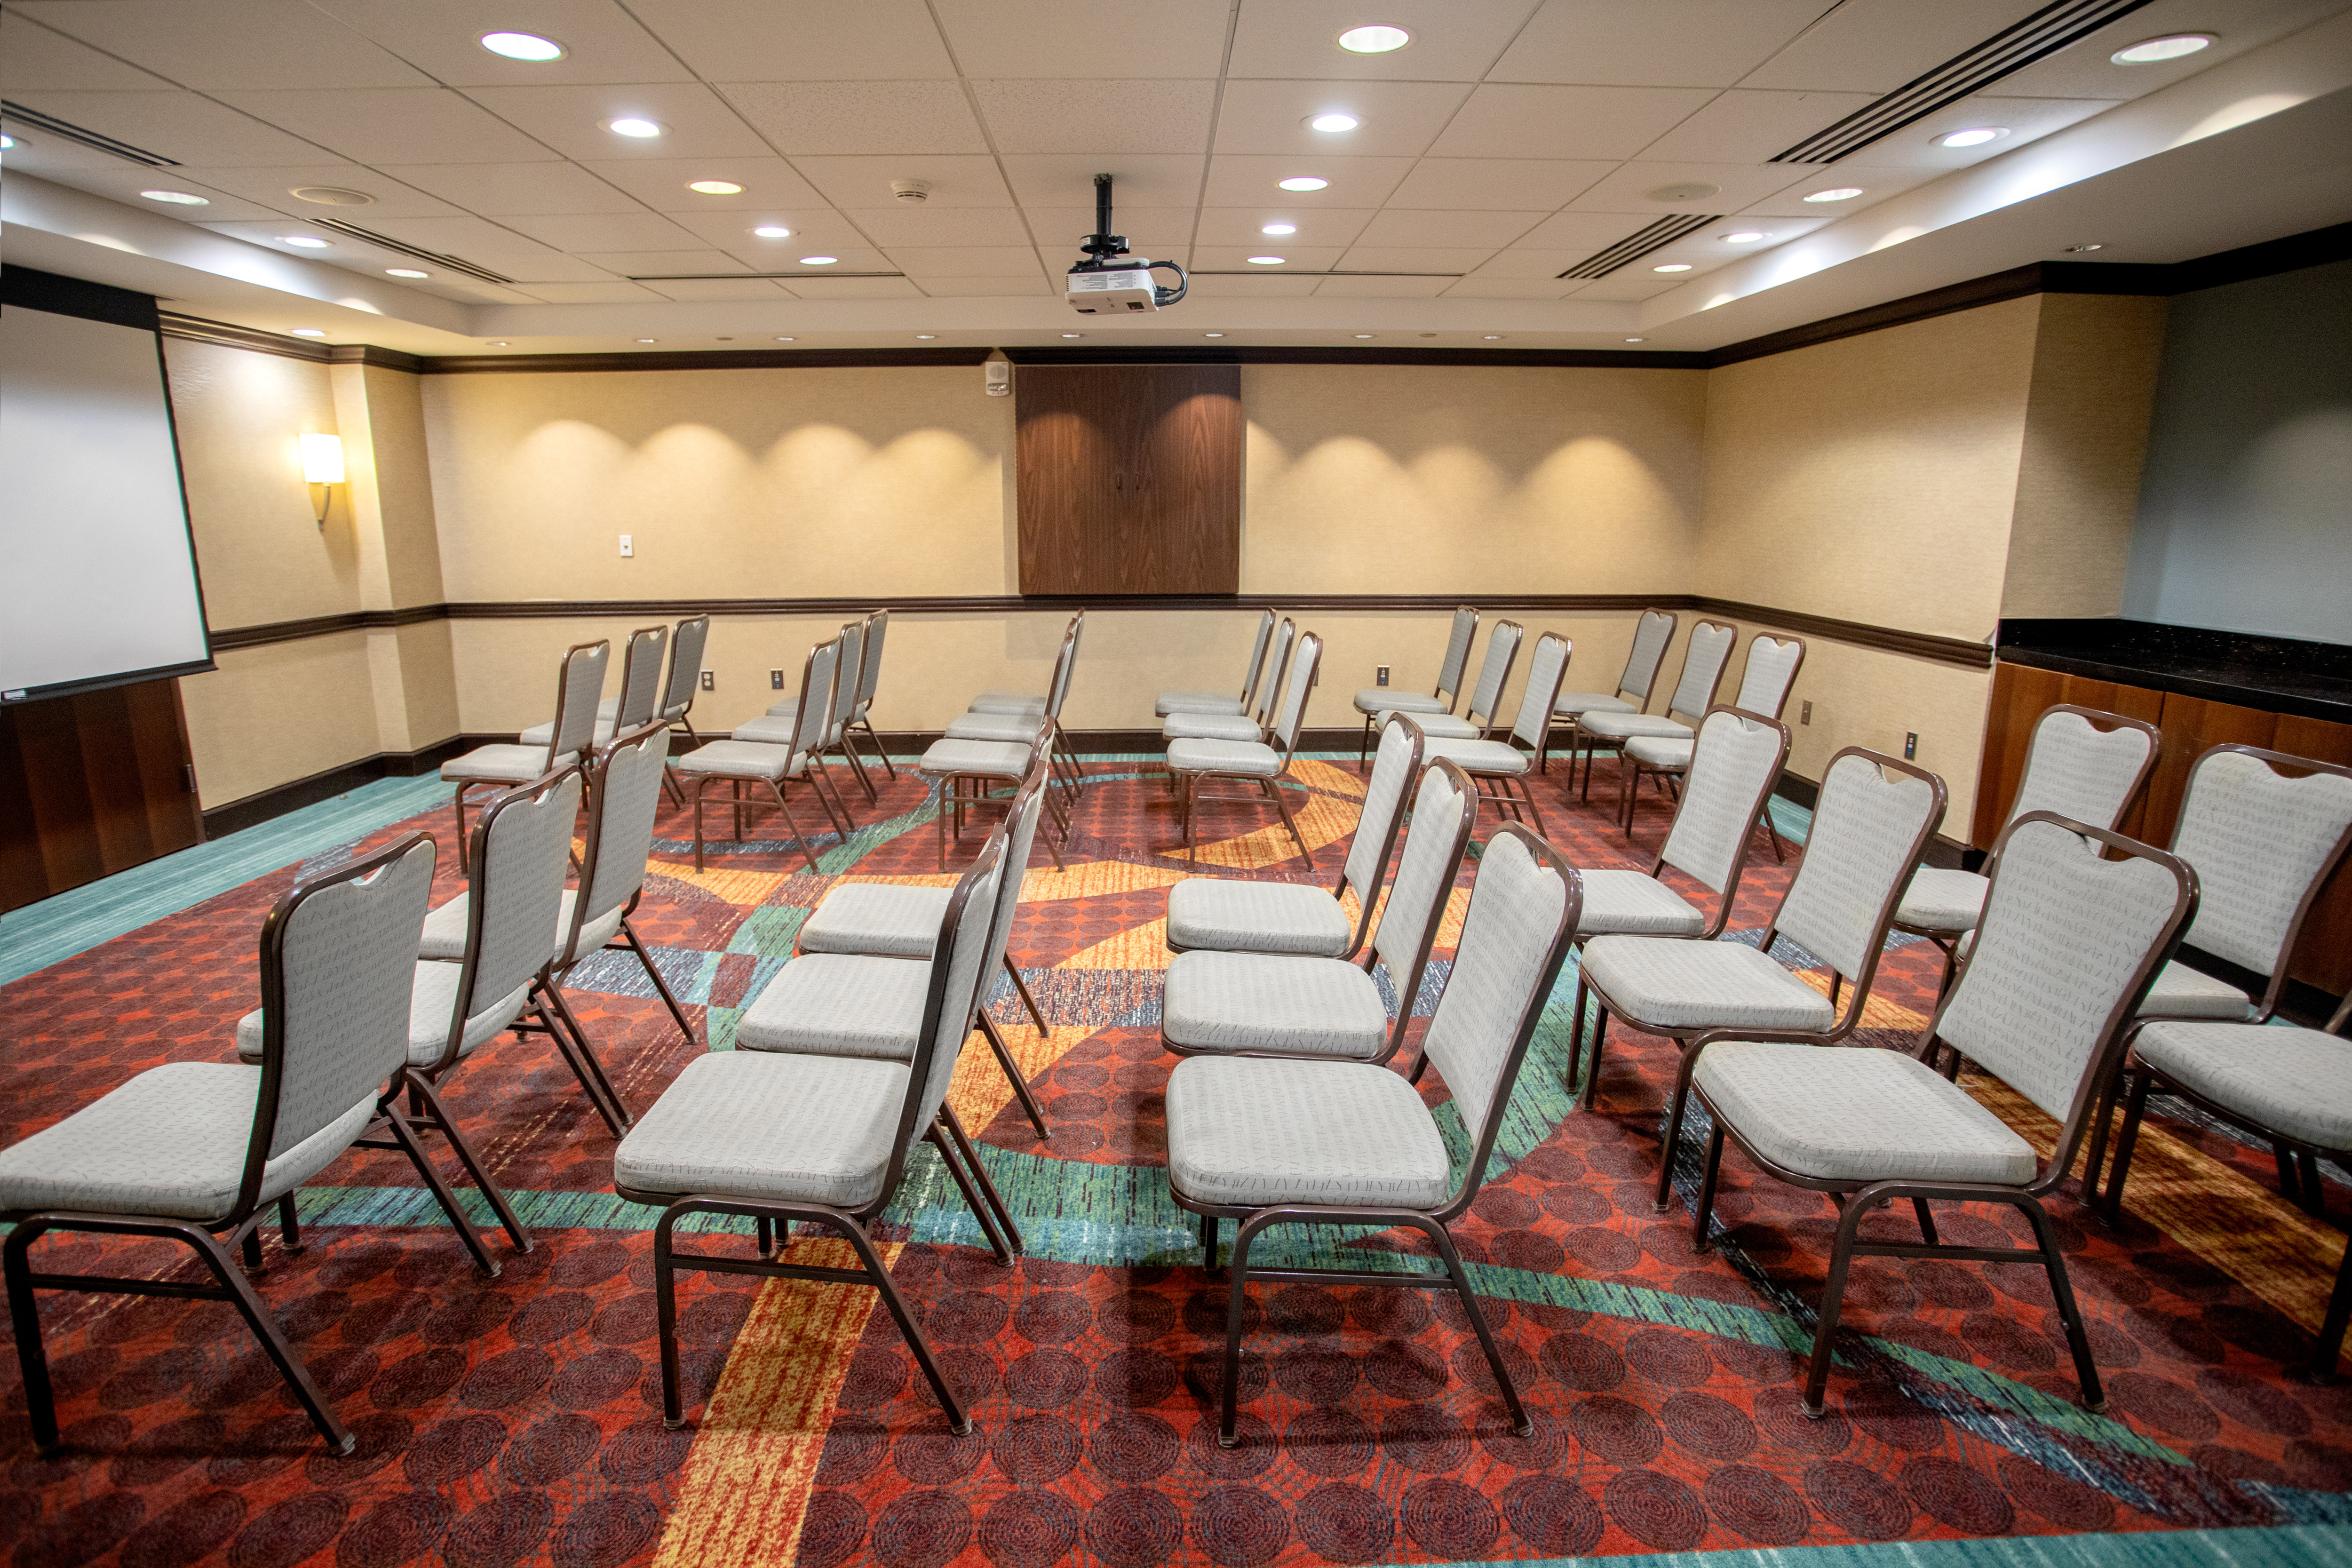 Theater Style Setup Meeting Room